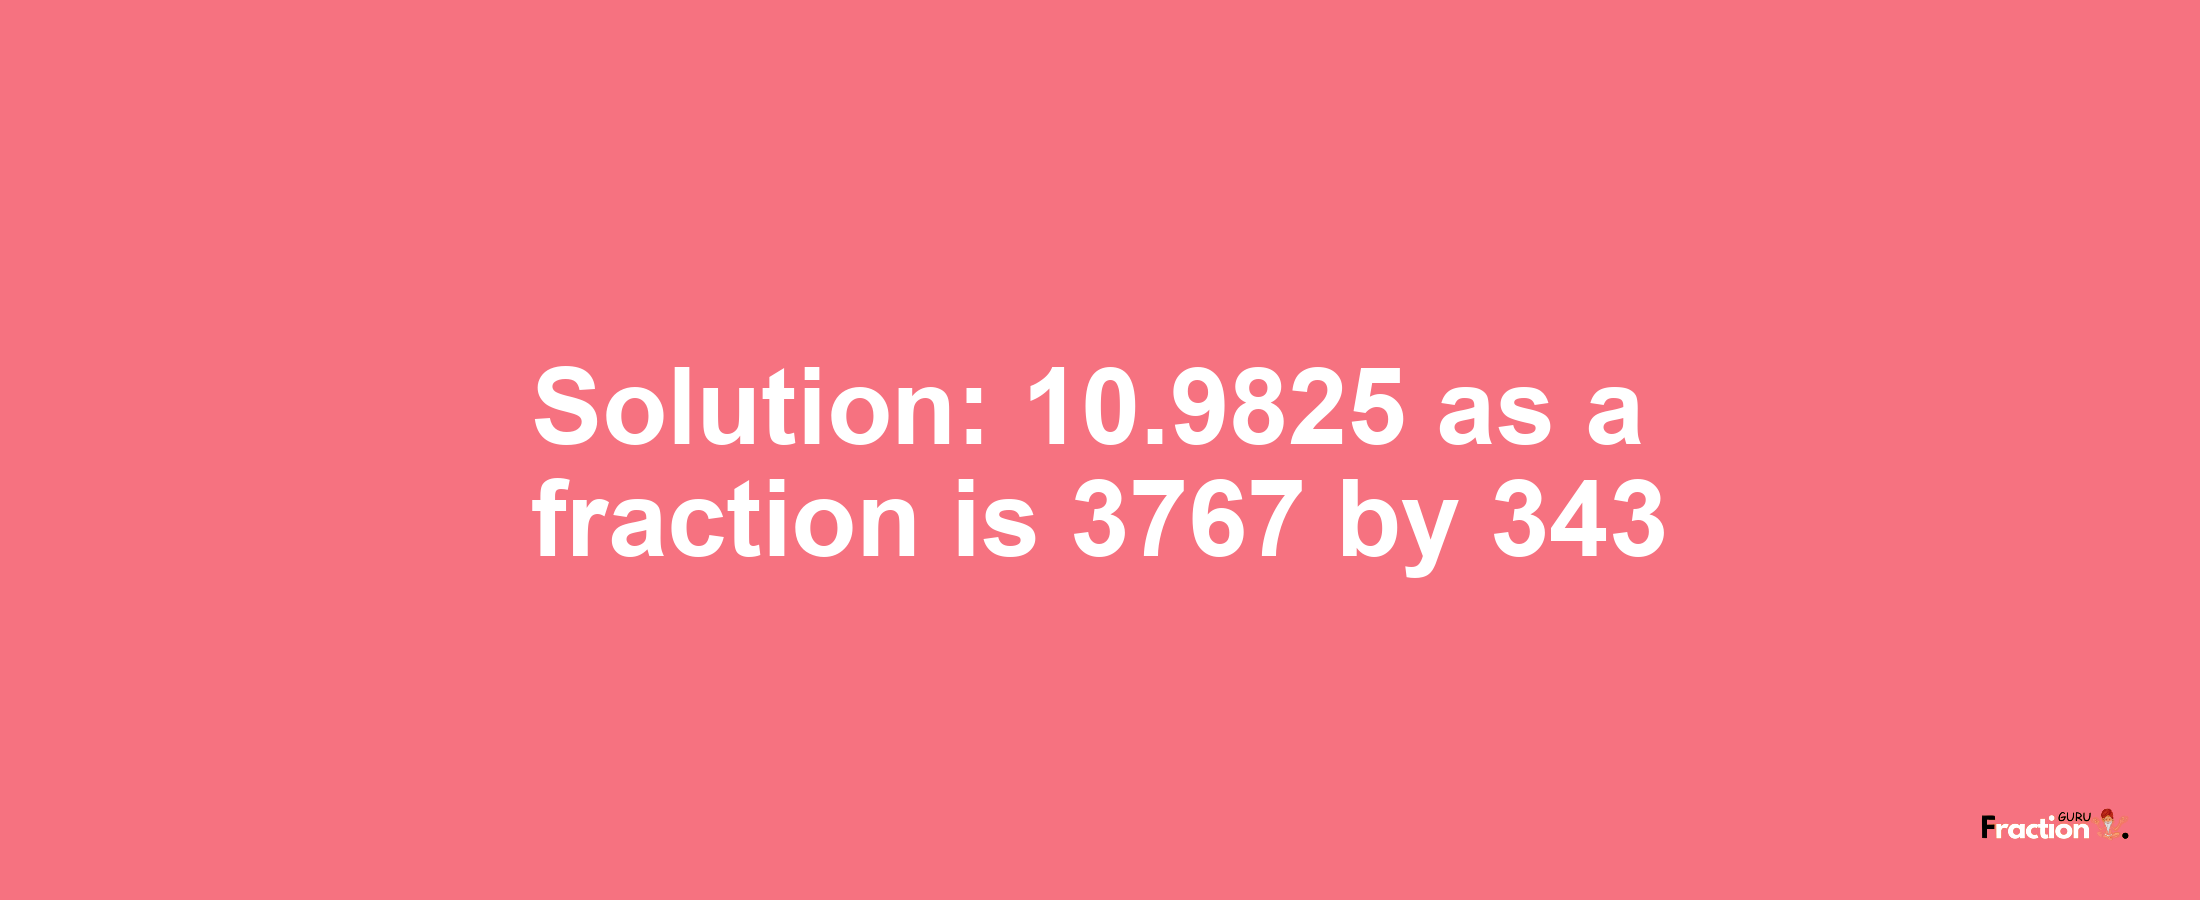 Solution:10.9825 as a fraction is 3767/343